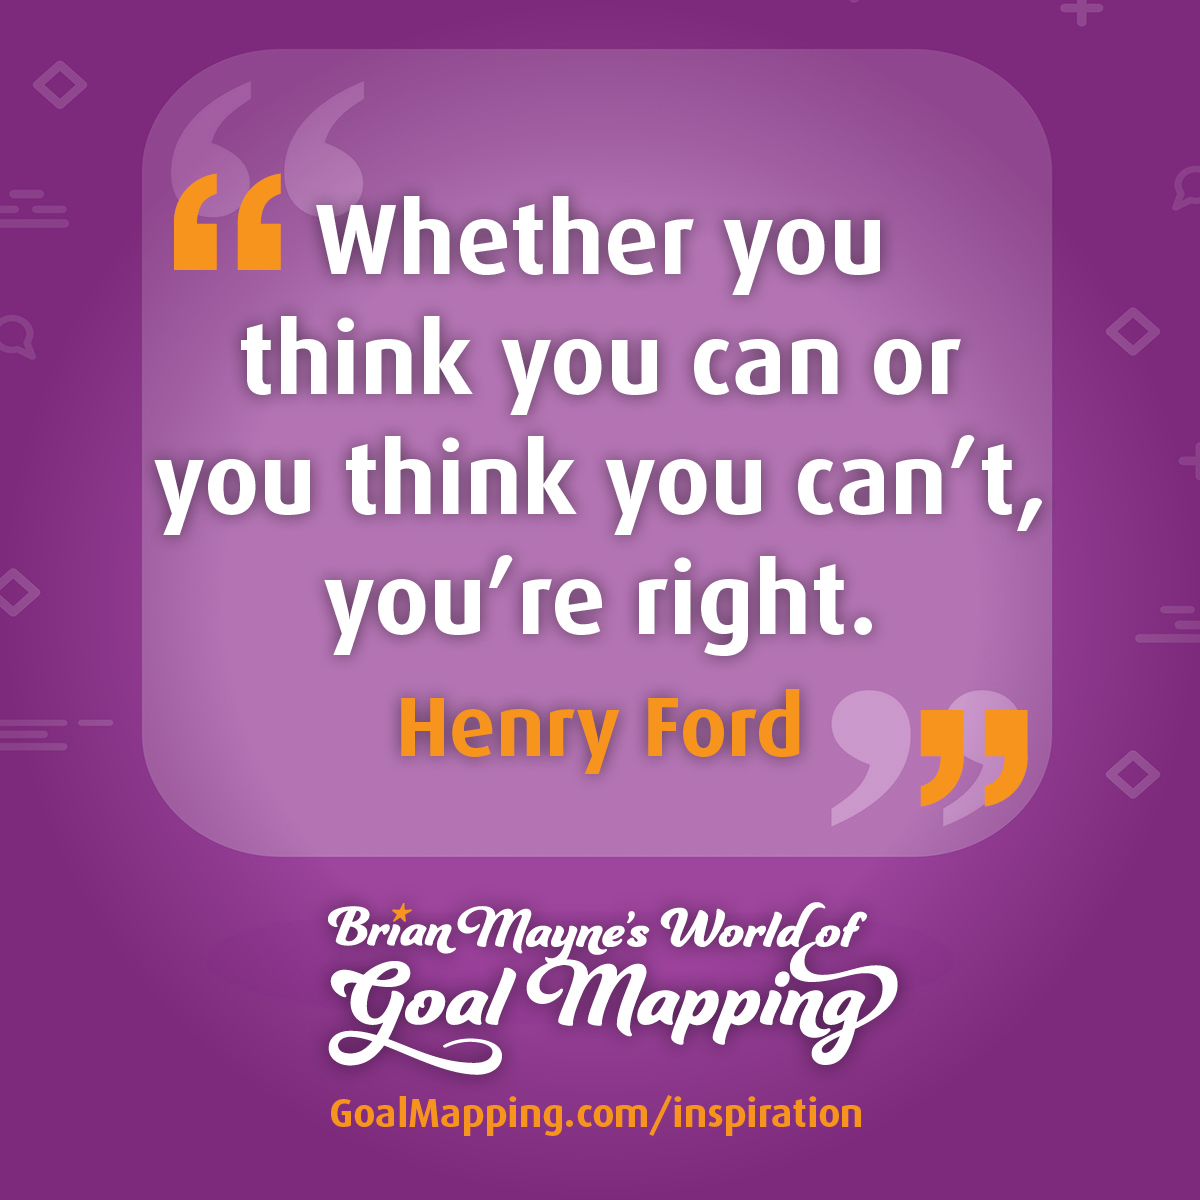 "Whether you think you can or you think you can’t, you’re right." Henry Ford